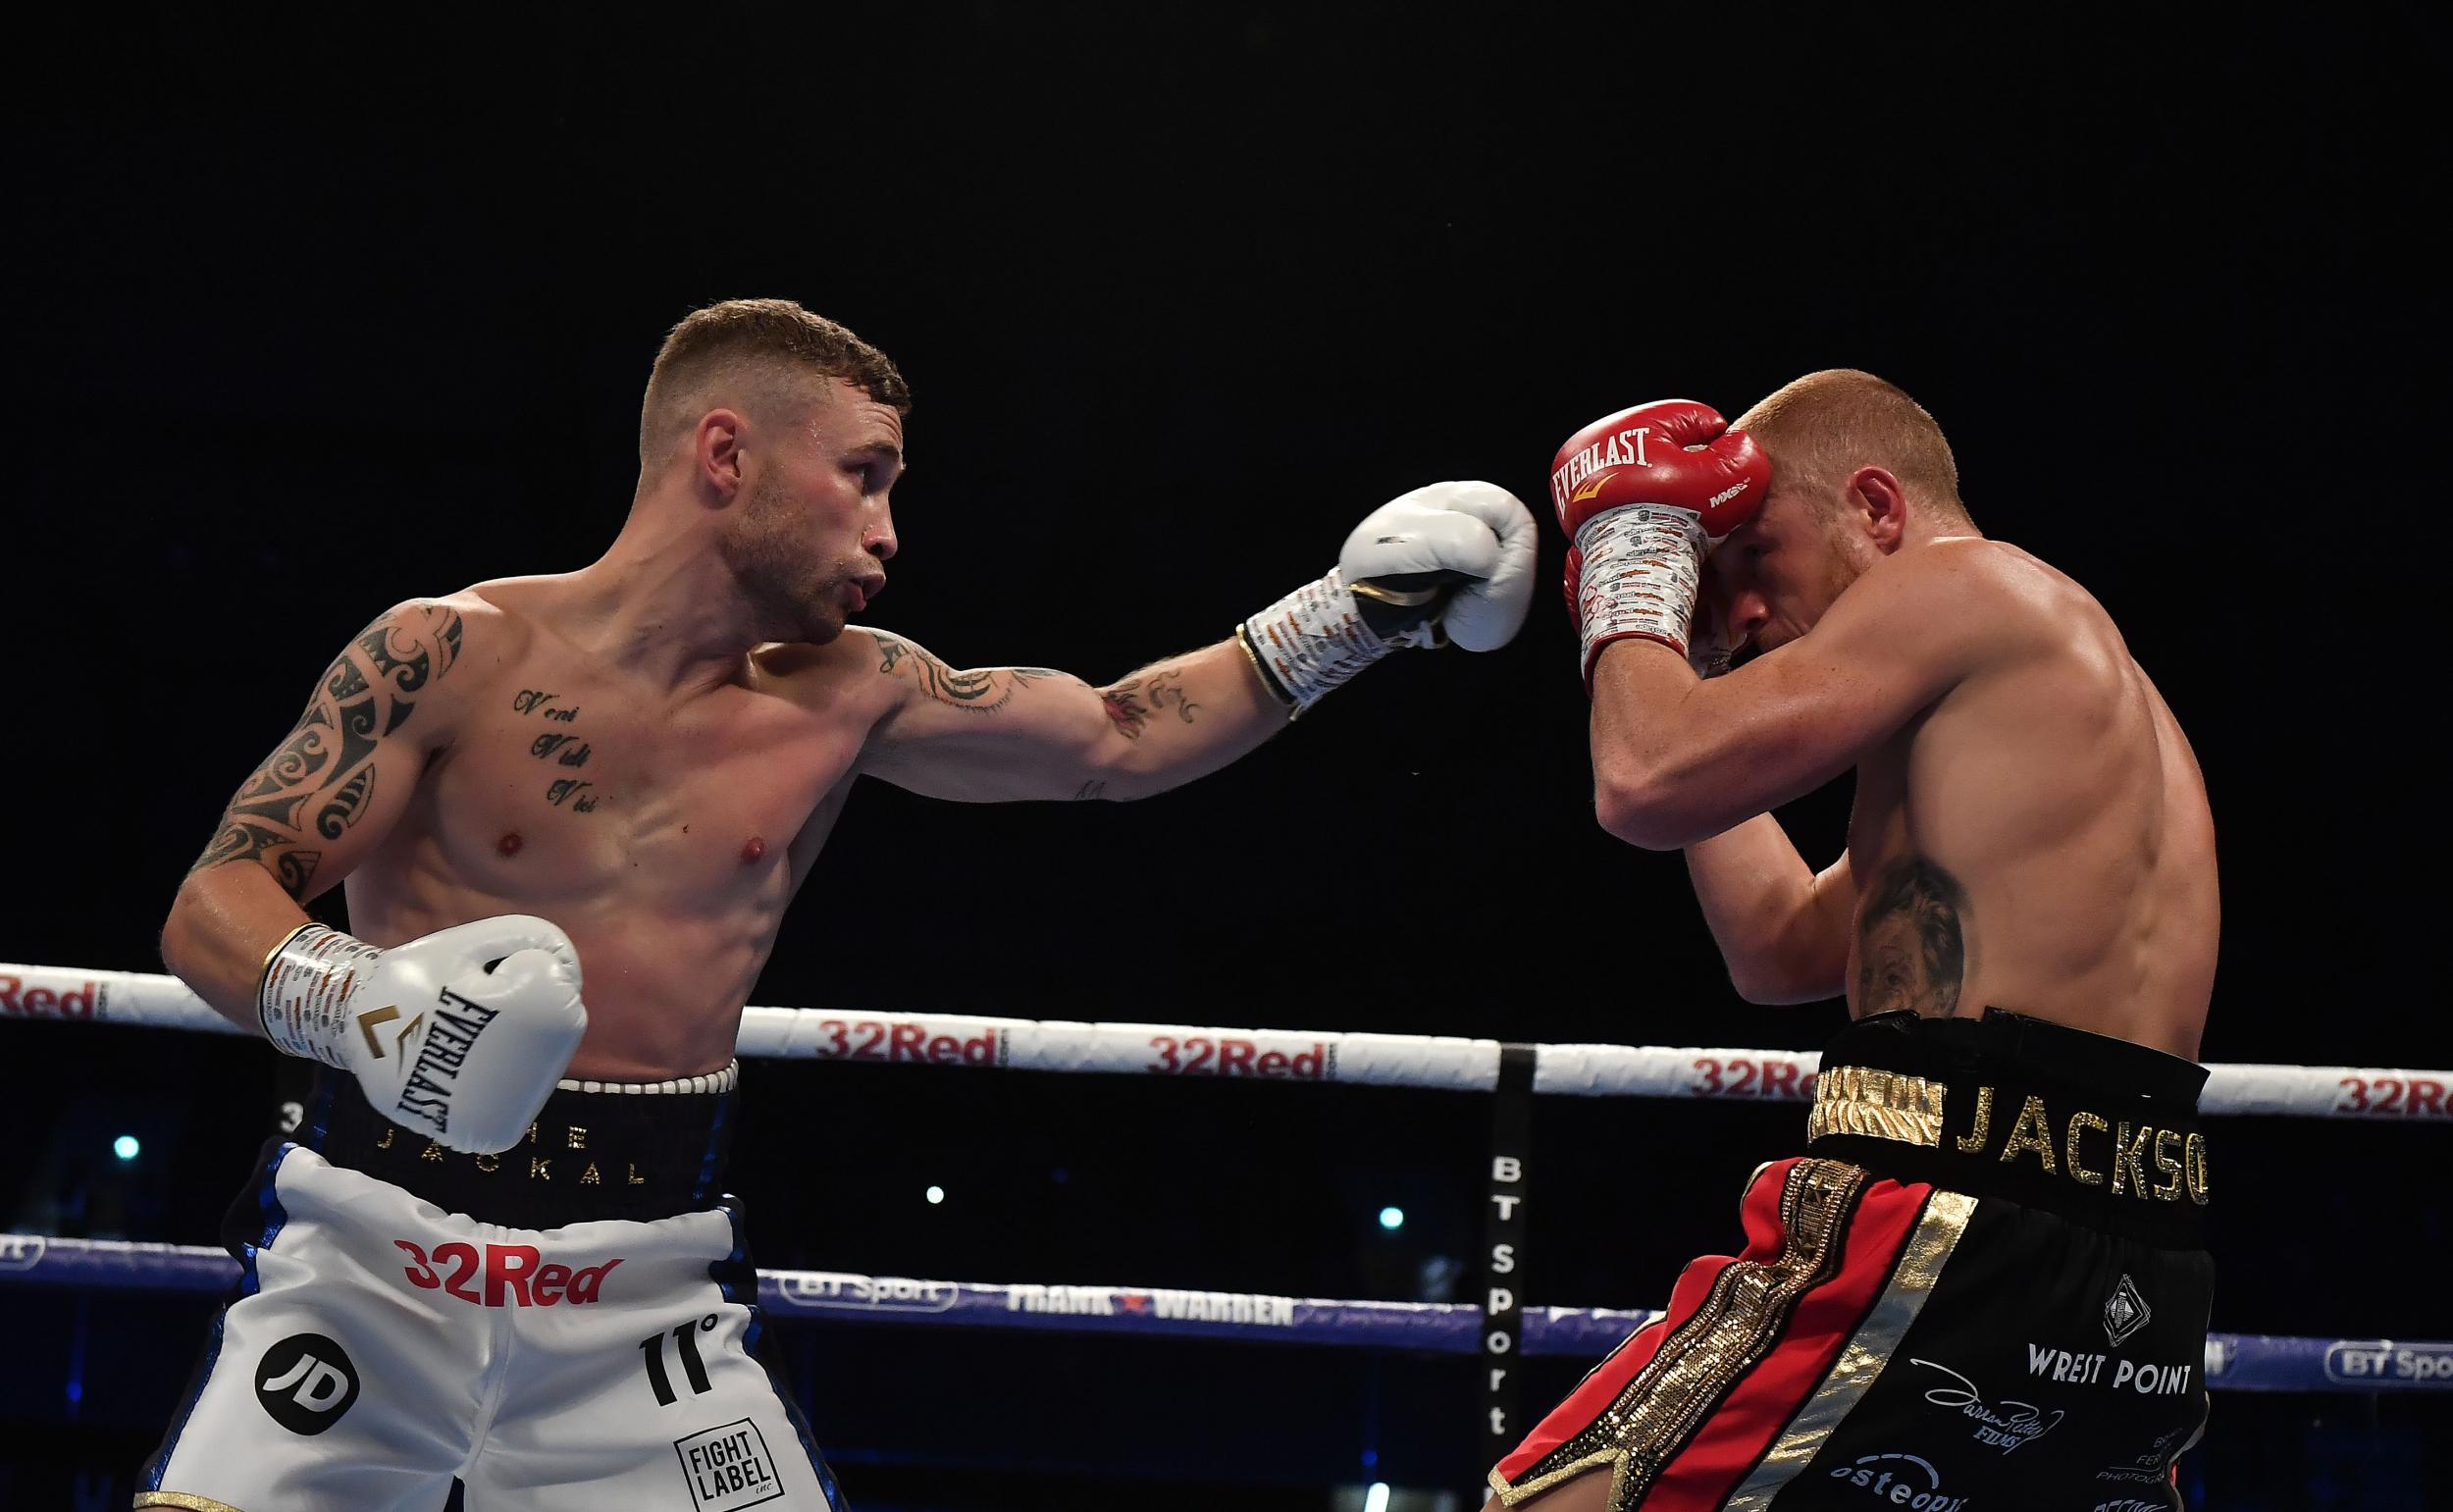 Carl Frampton controlled the bout before stopping Jackson in the ninth round